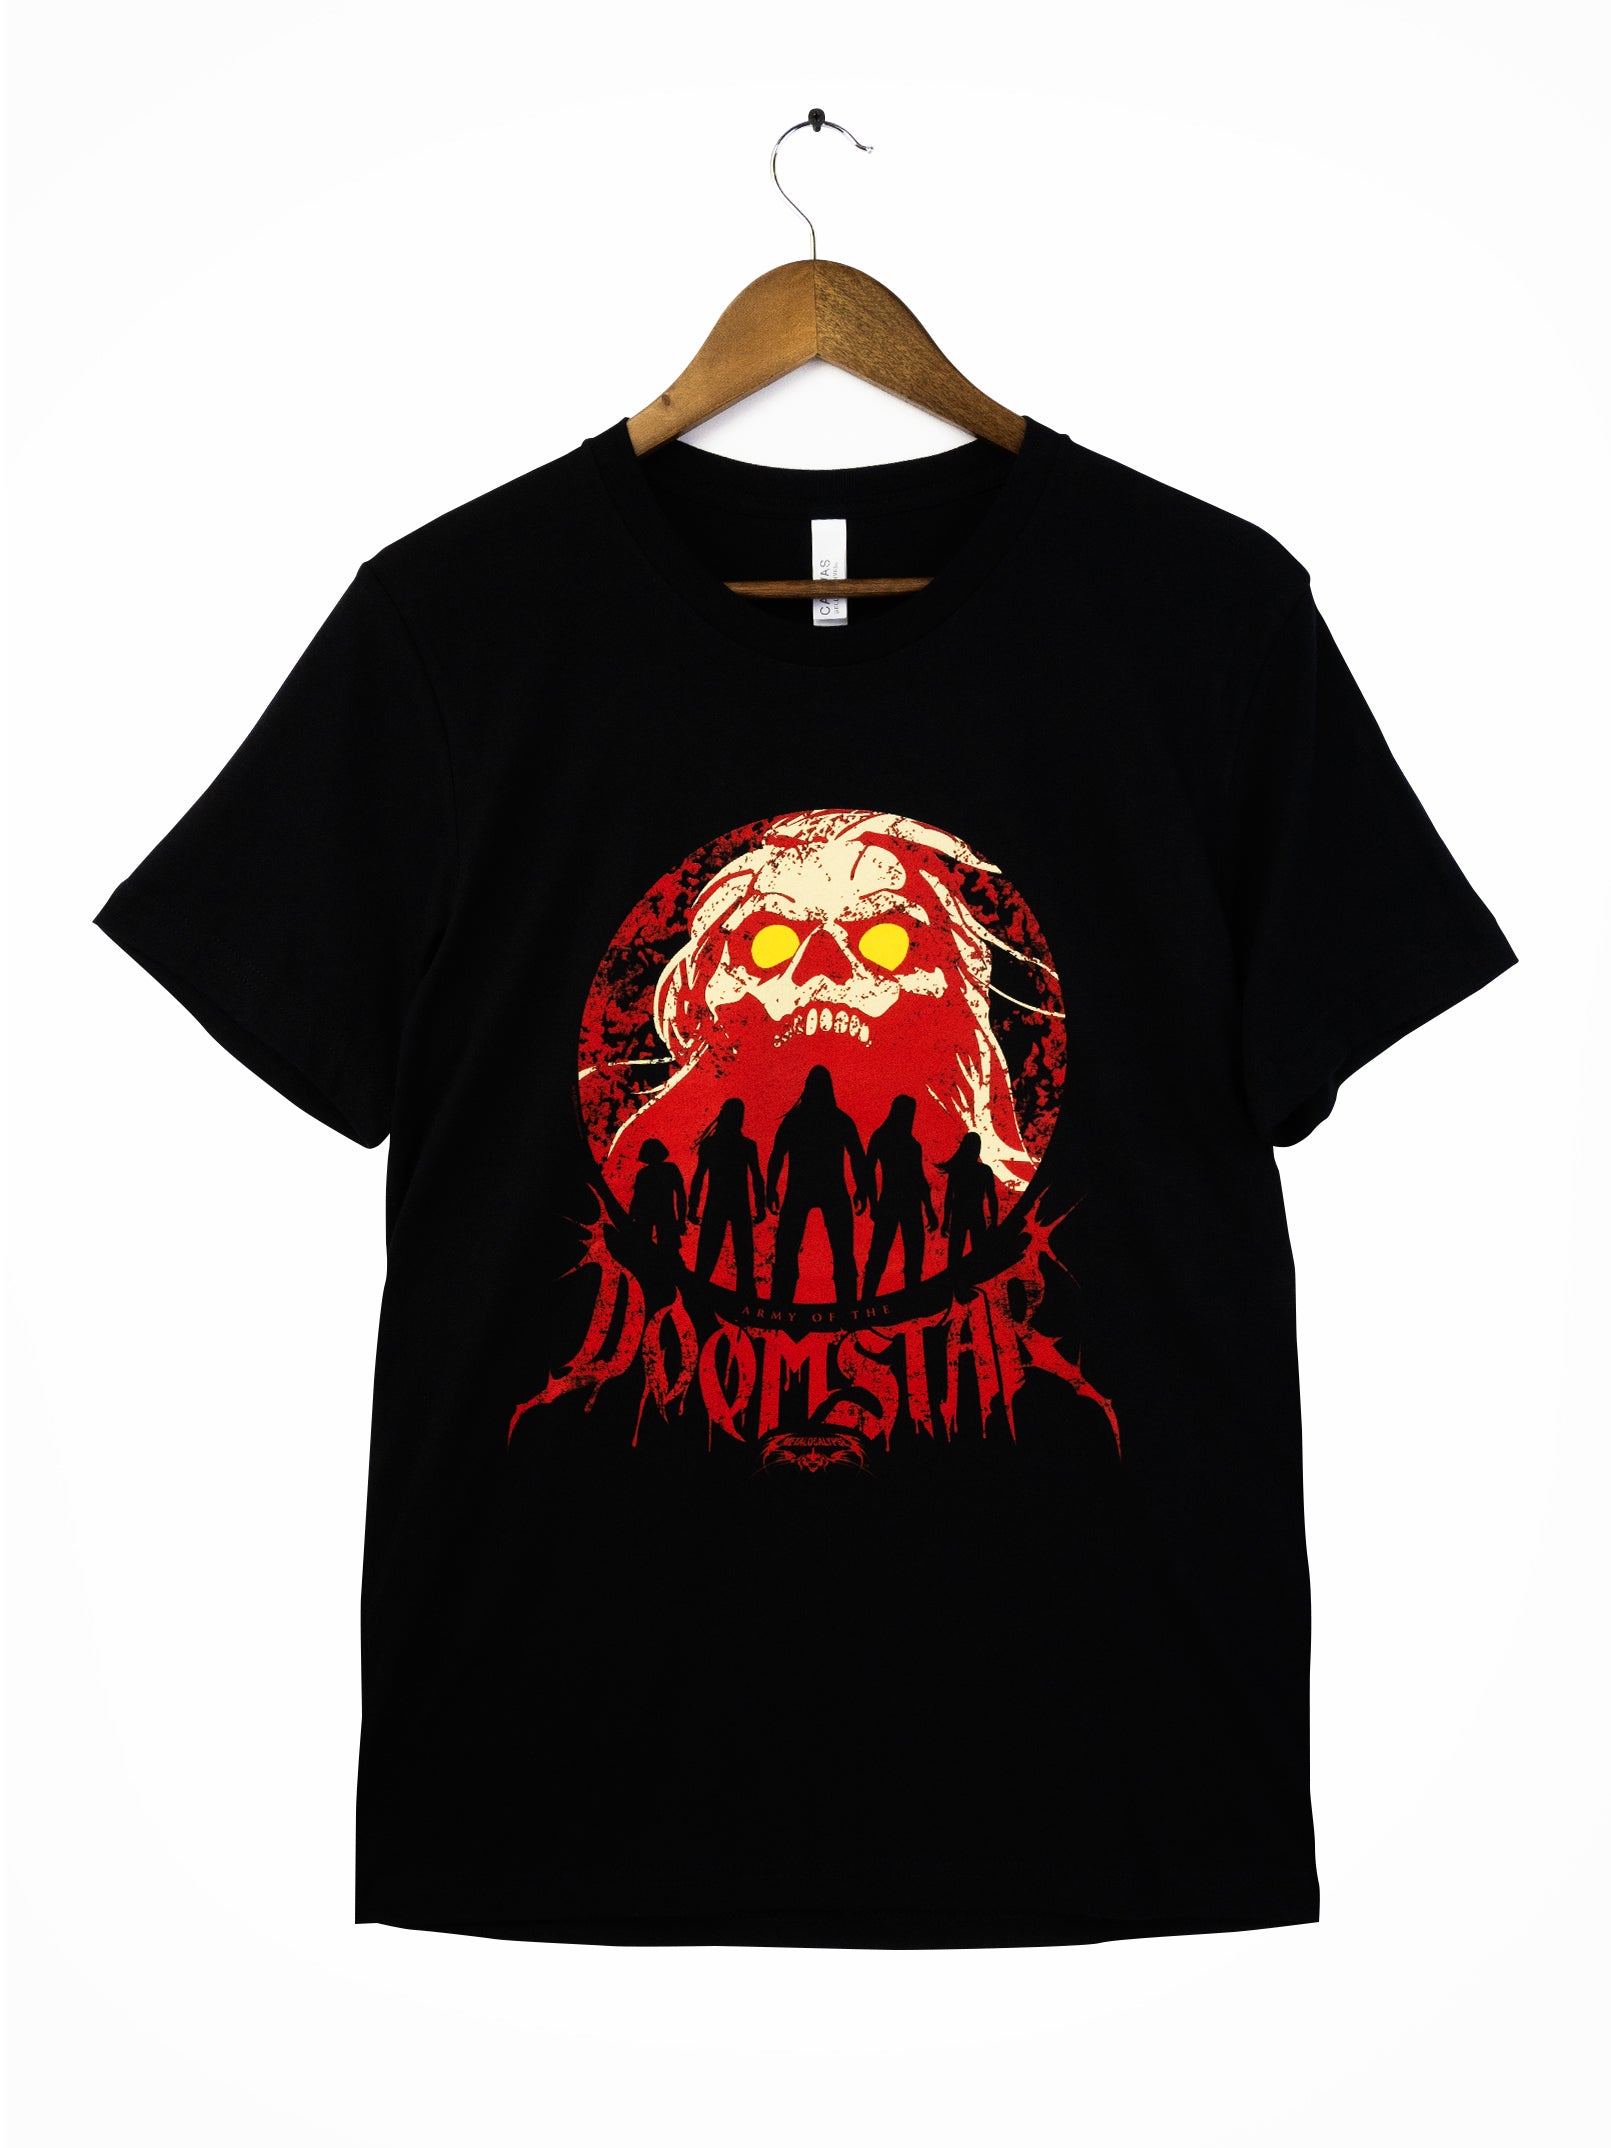 Metalocalypse Doomstar Tee by Titmouse Front View